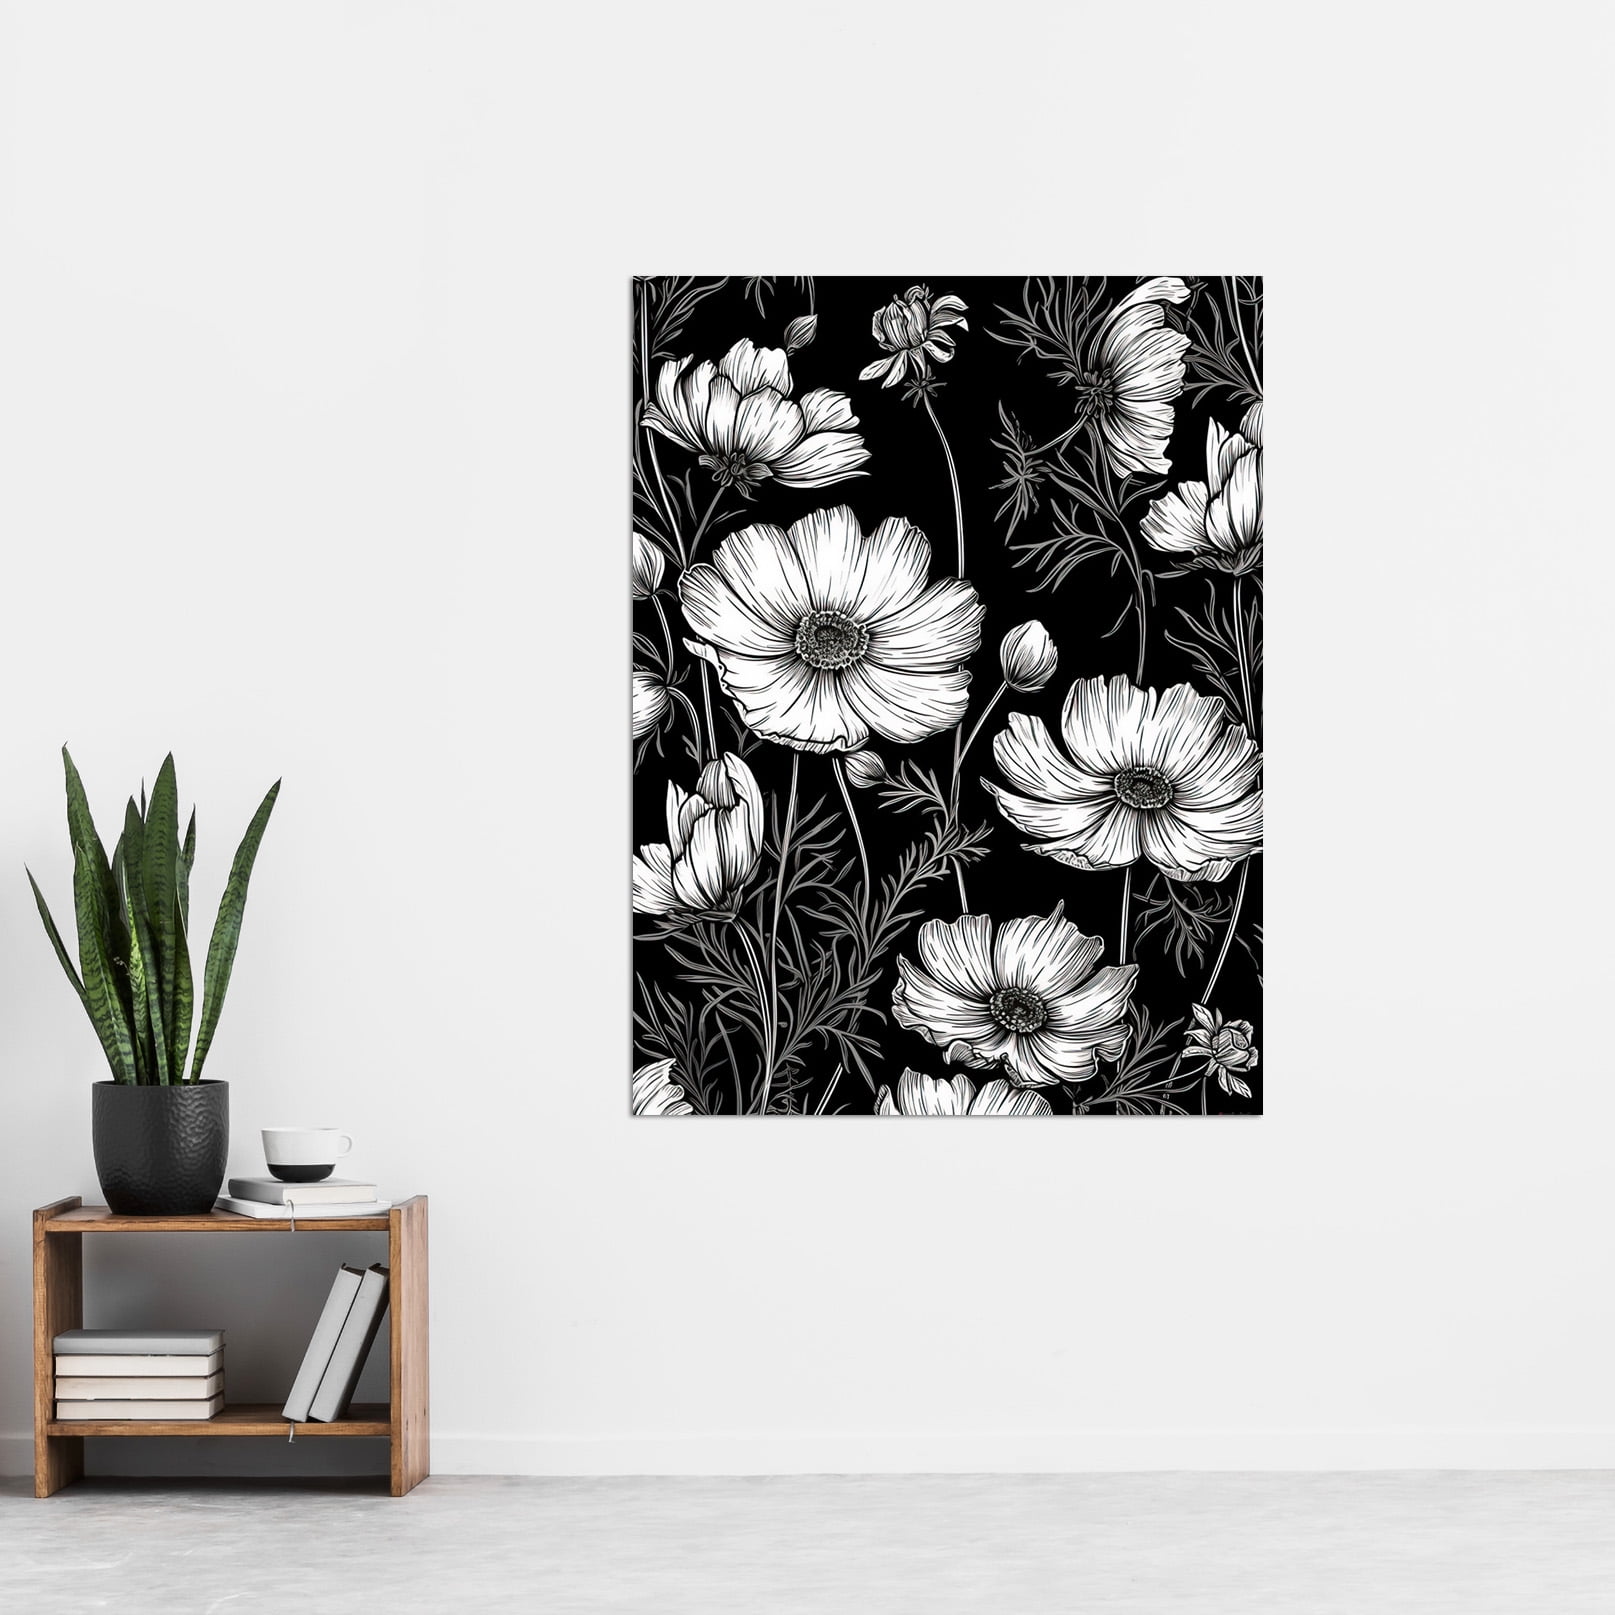 Detailed Black and White Poster Paper Large Thick Art Inch Wall Cosmos Plants Print 18X24 Flower